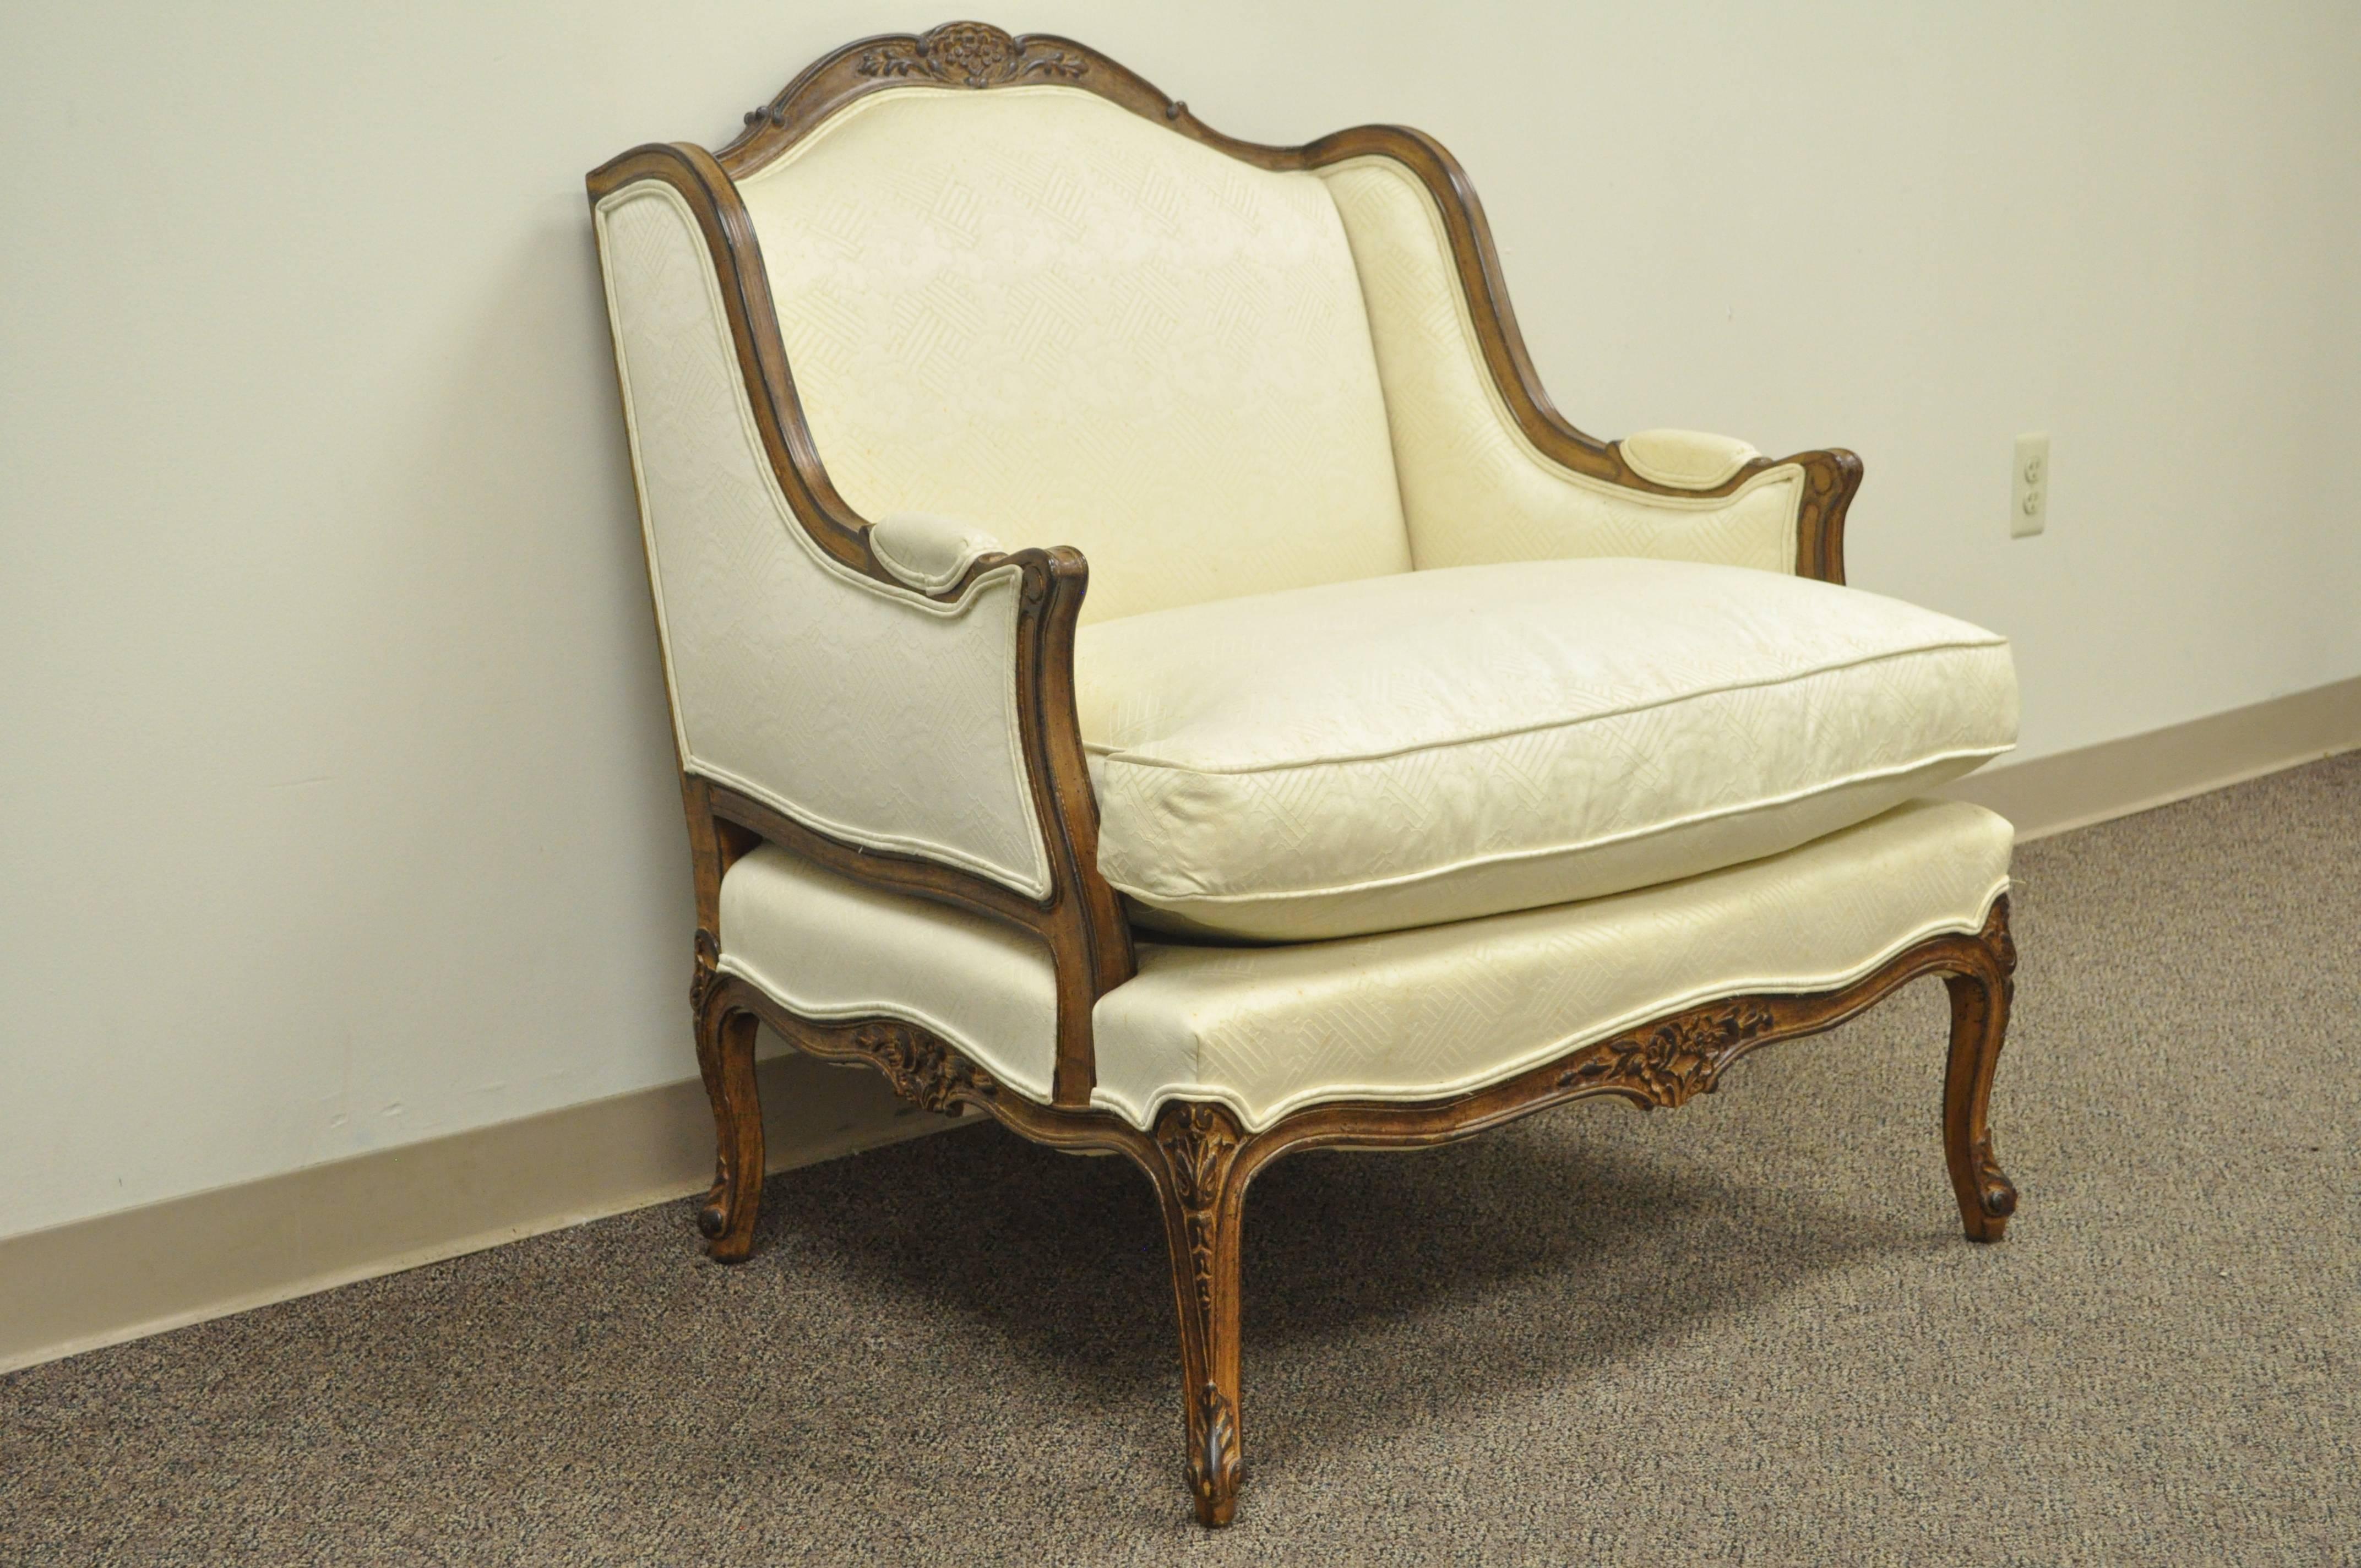 Vintage Wide Frame French Country Louis XV Style Floral Carved Bergere Arm Chair 1